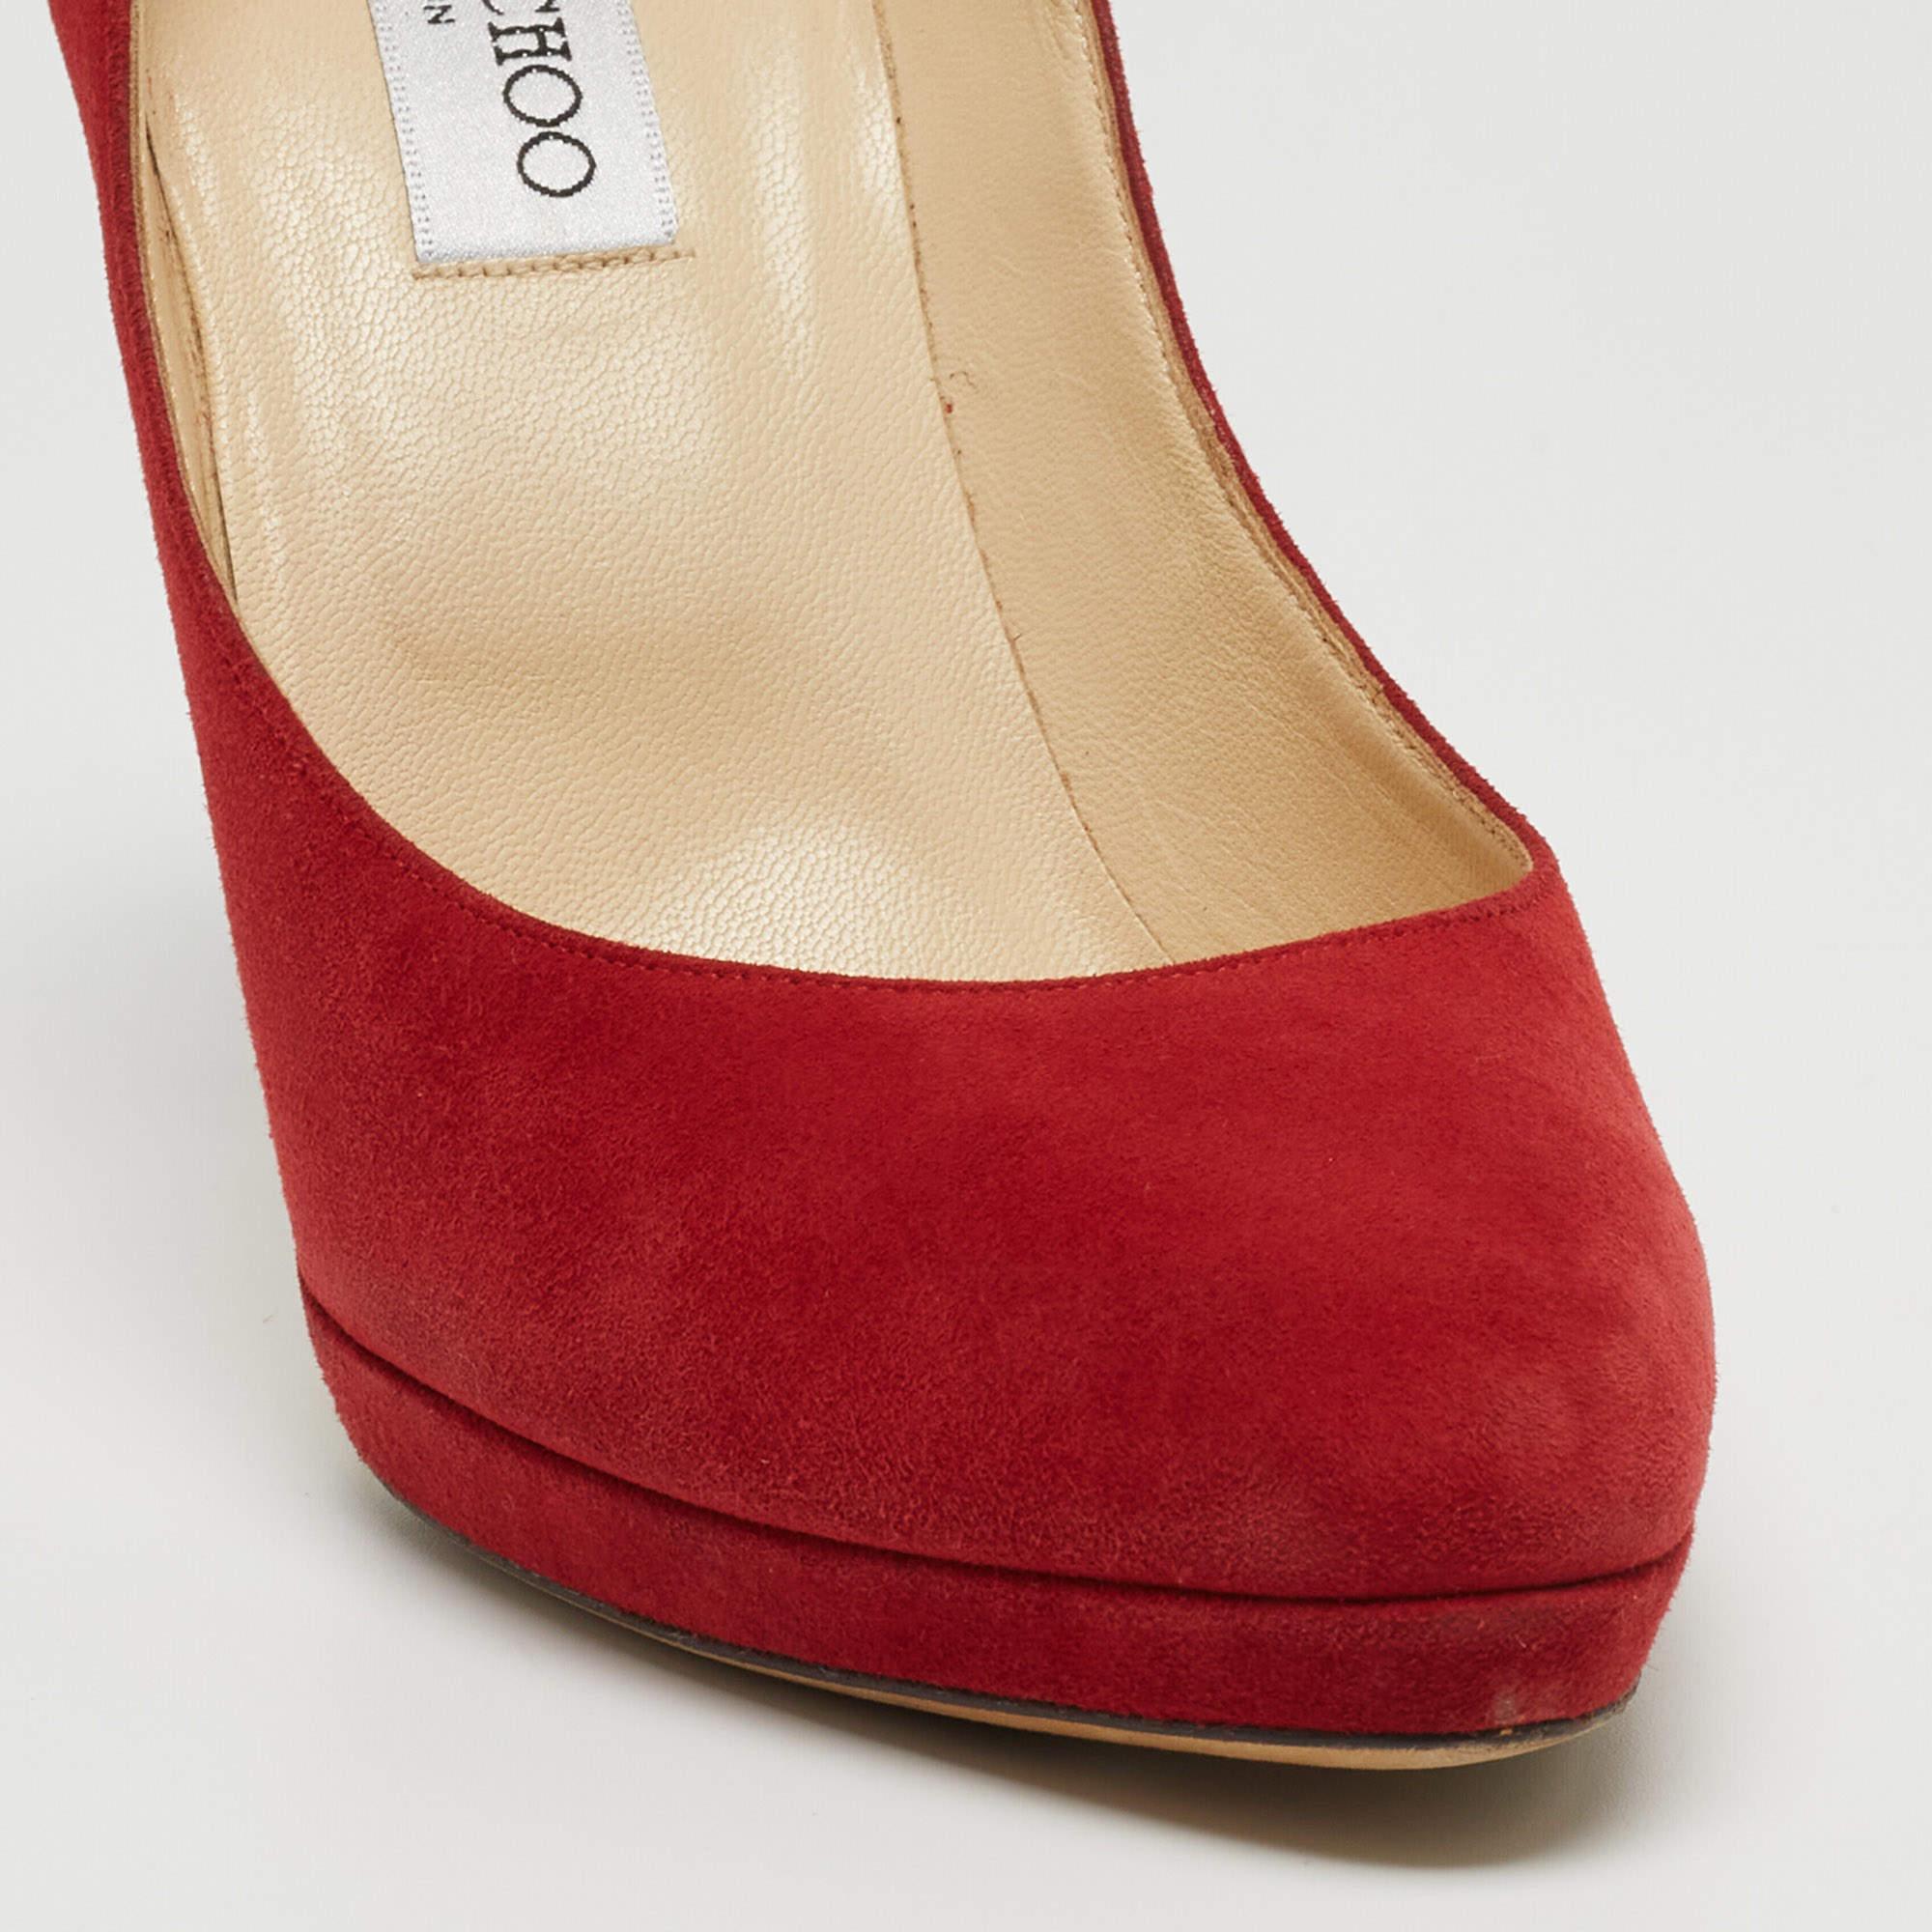 Jimmy Choo Red Suede Aimee Platform Pumps Size 38 For Sale 3